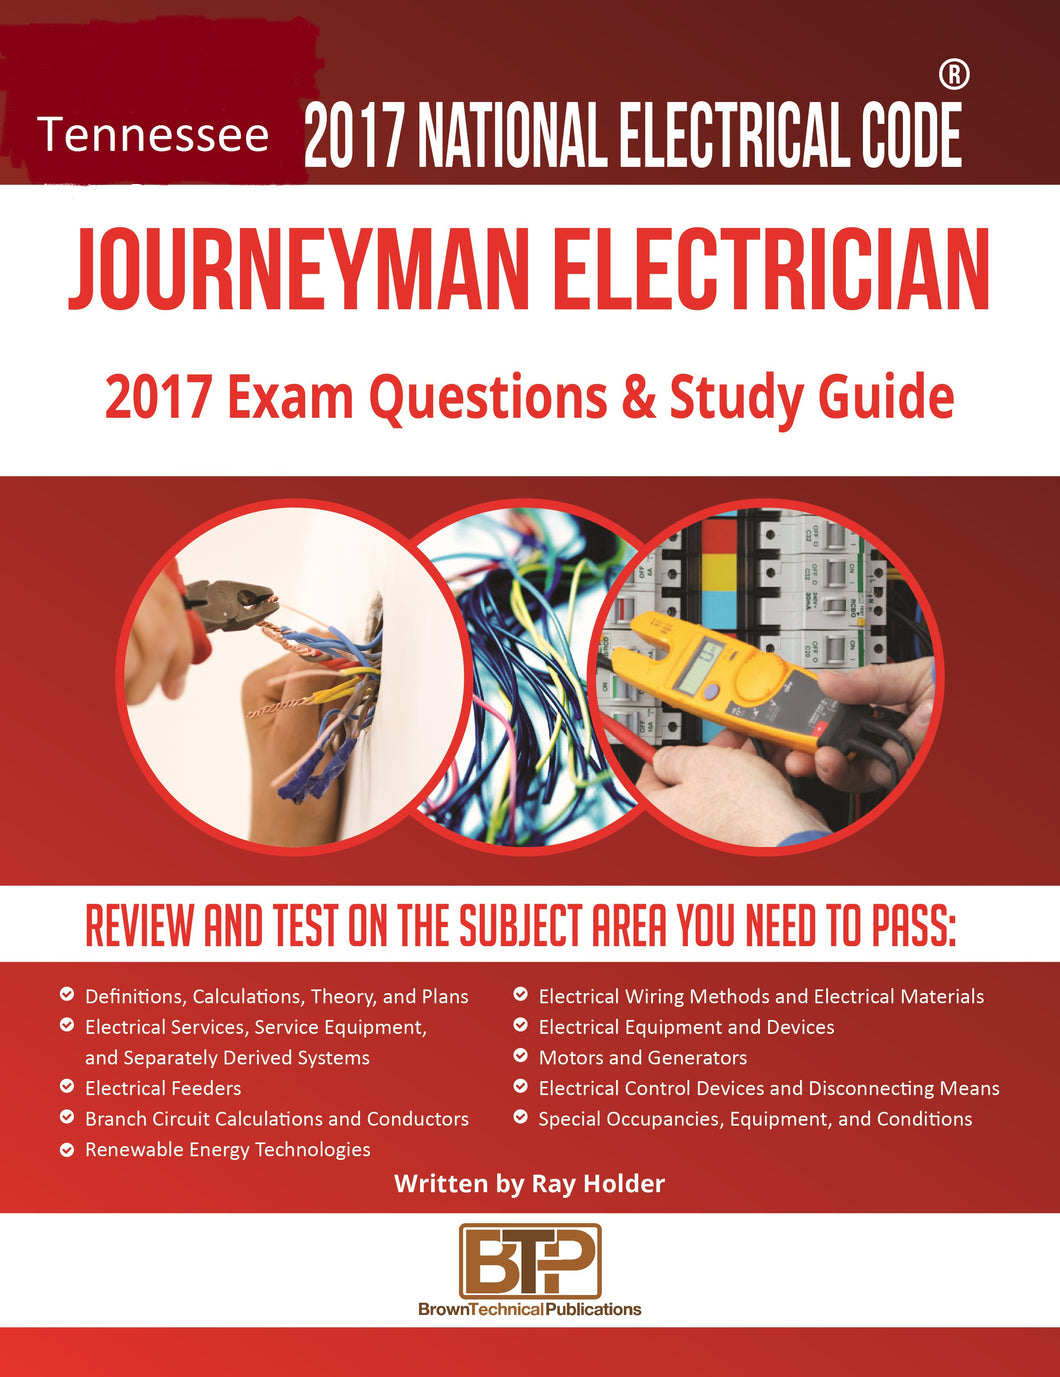 Tennessee 2017 Journeyman Electrician Study Guide